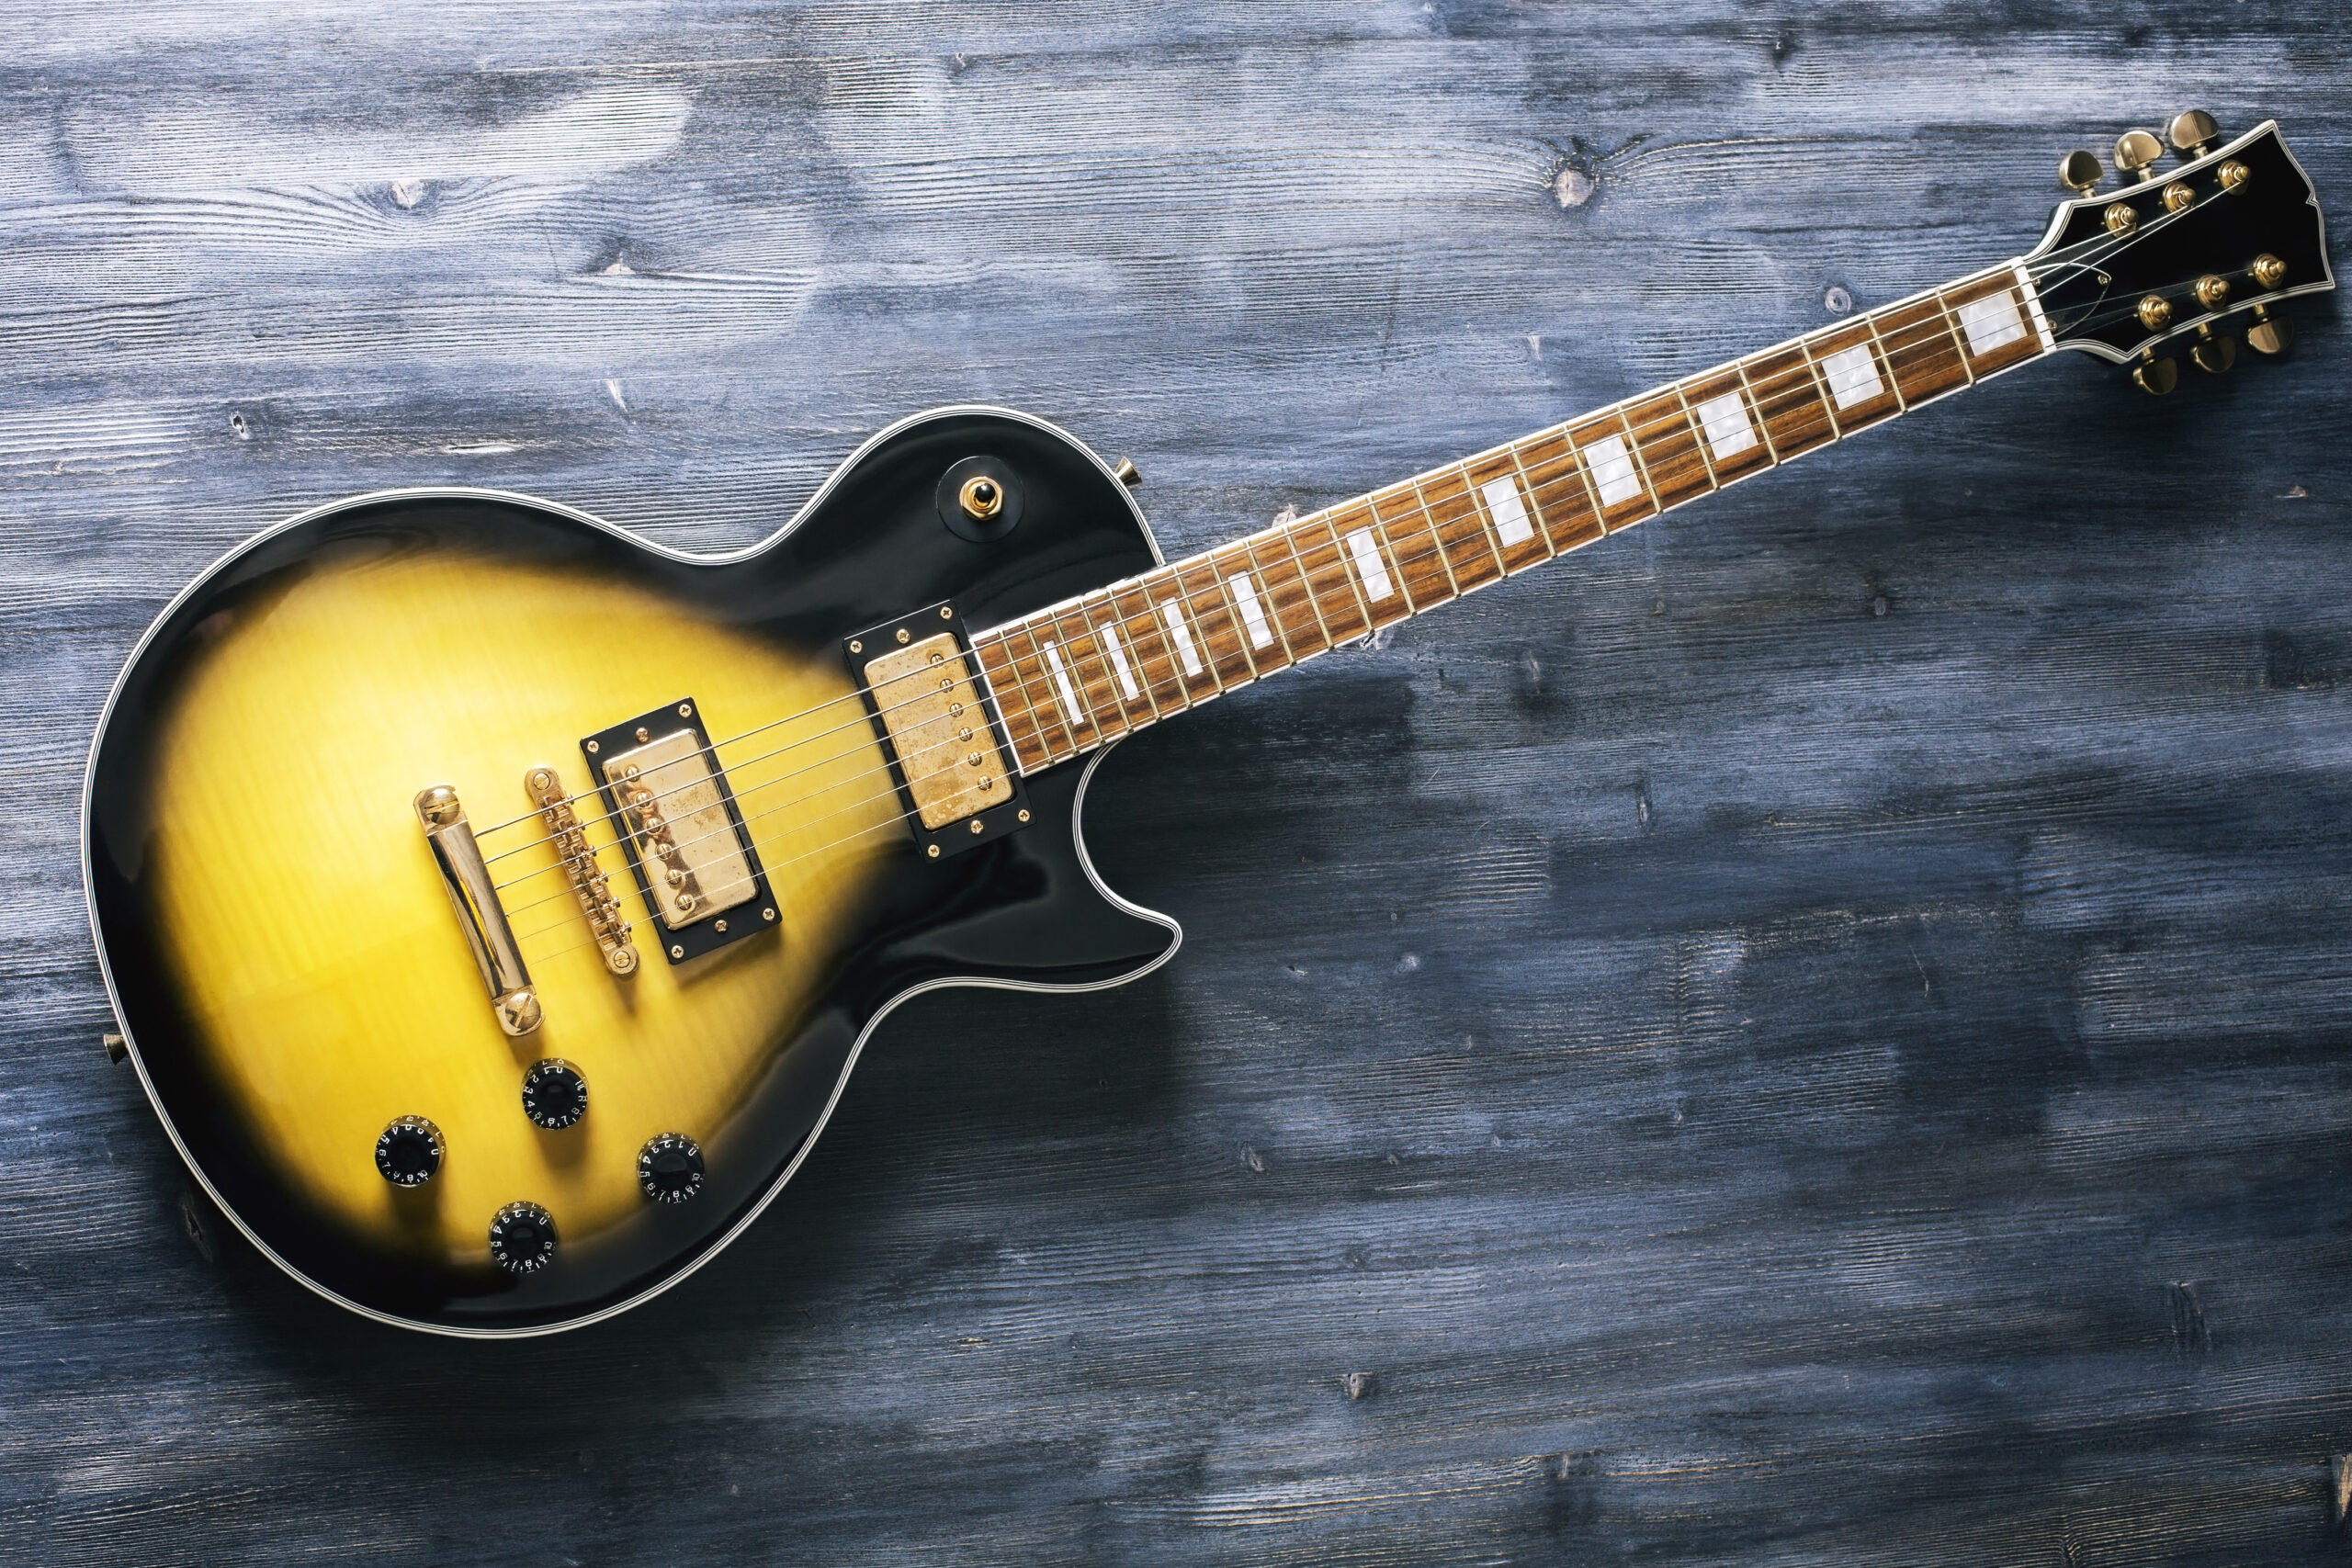 Top View Of Black And Yellow Electric Guitar